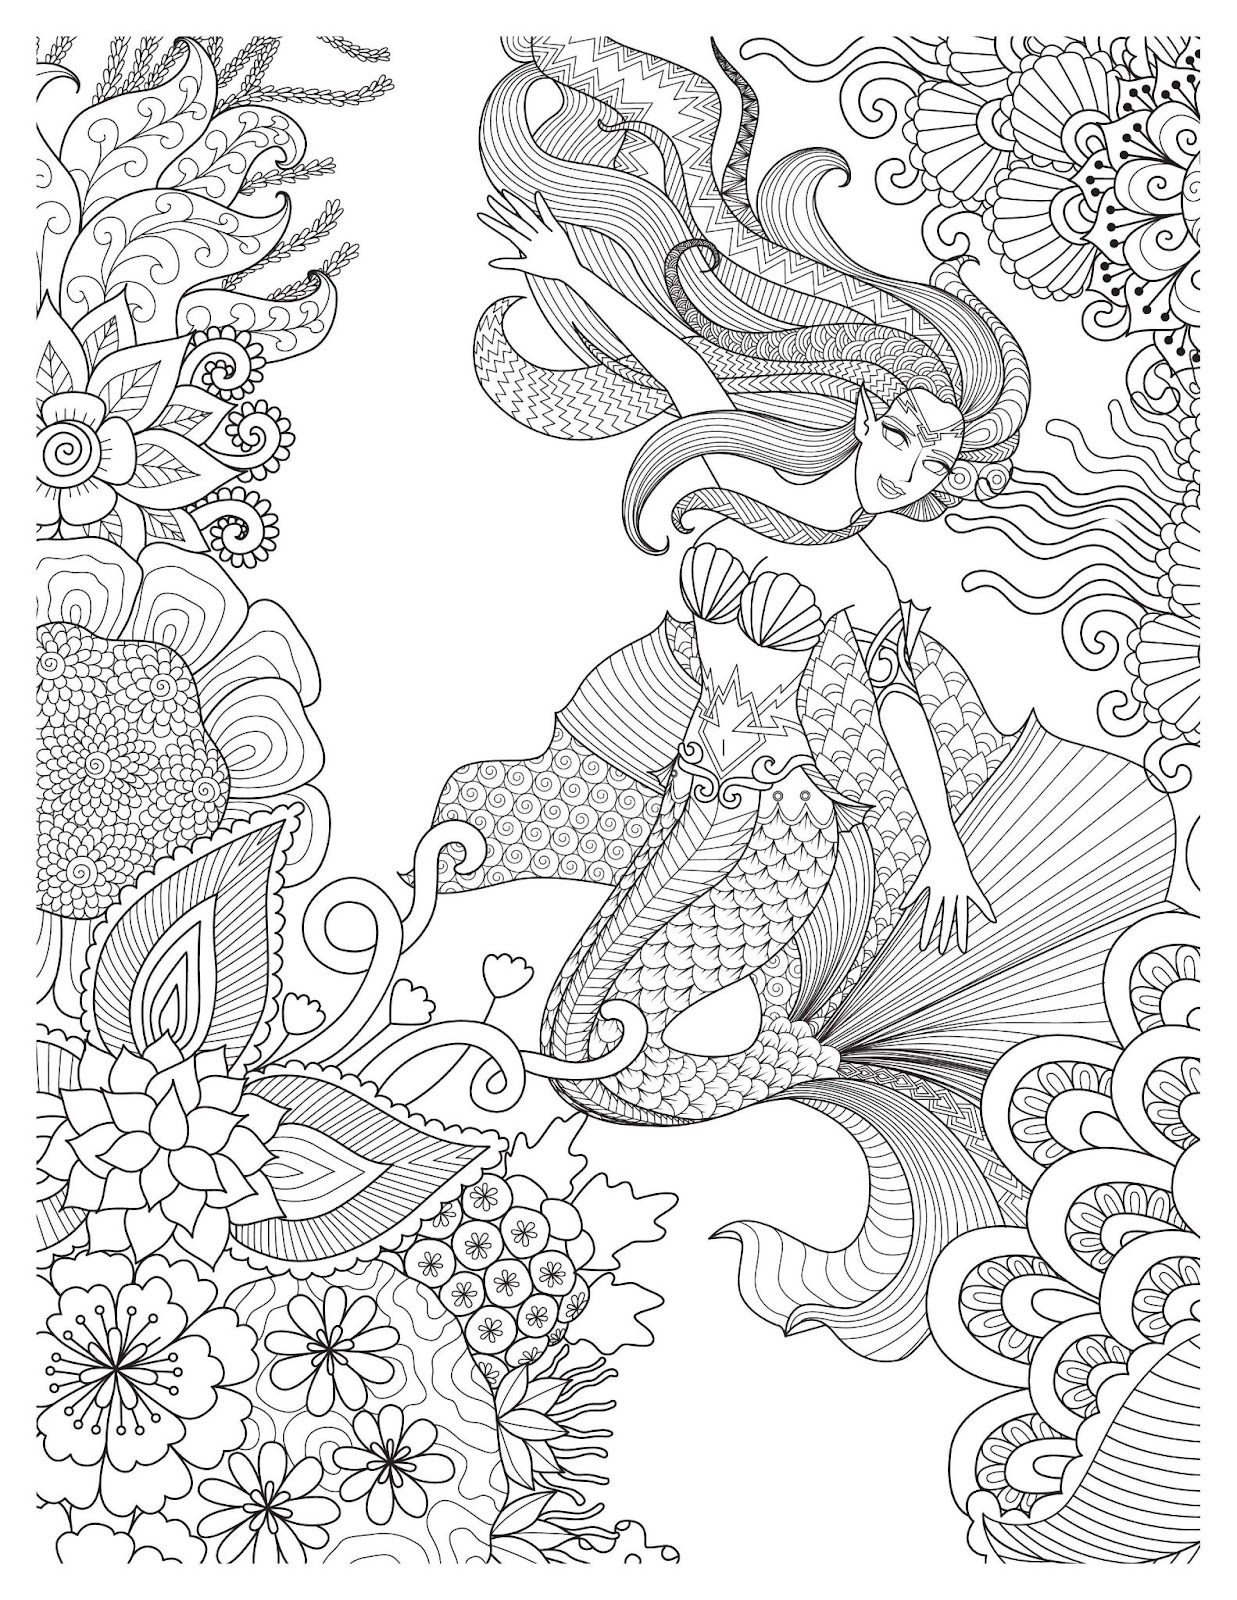 Mermaid Coloring Pages28